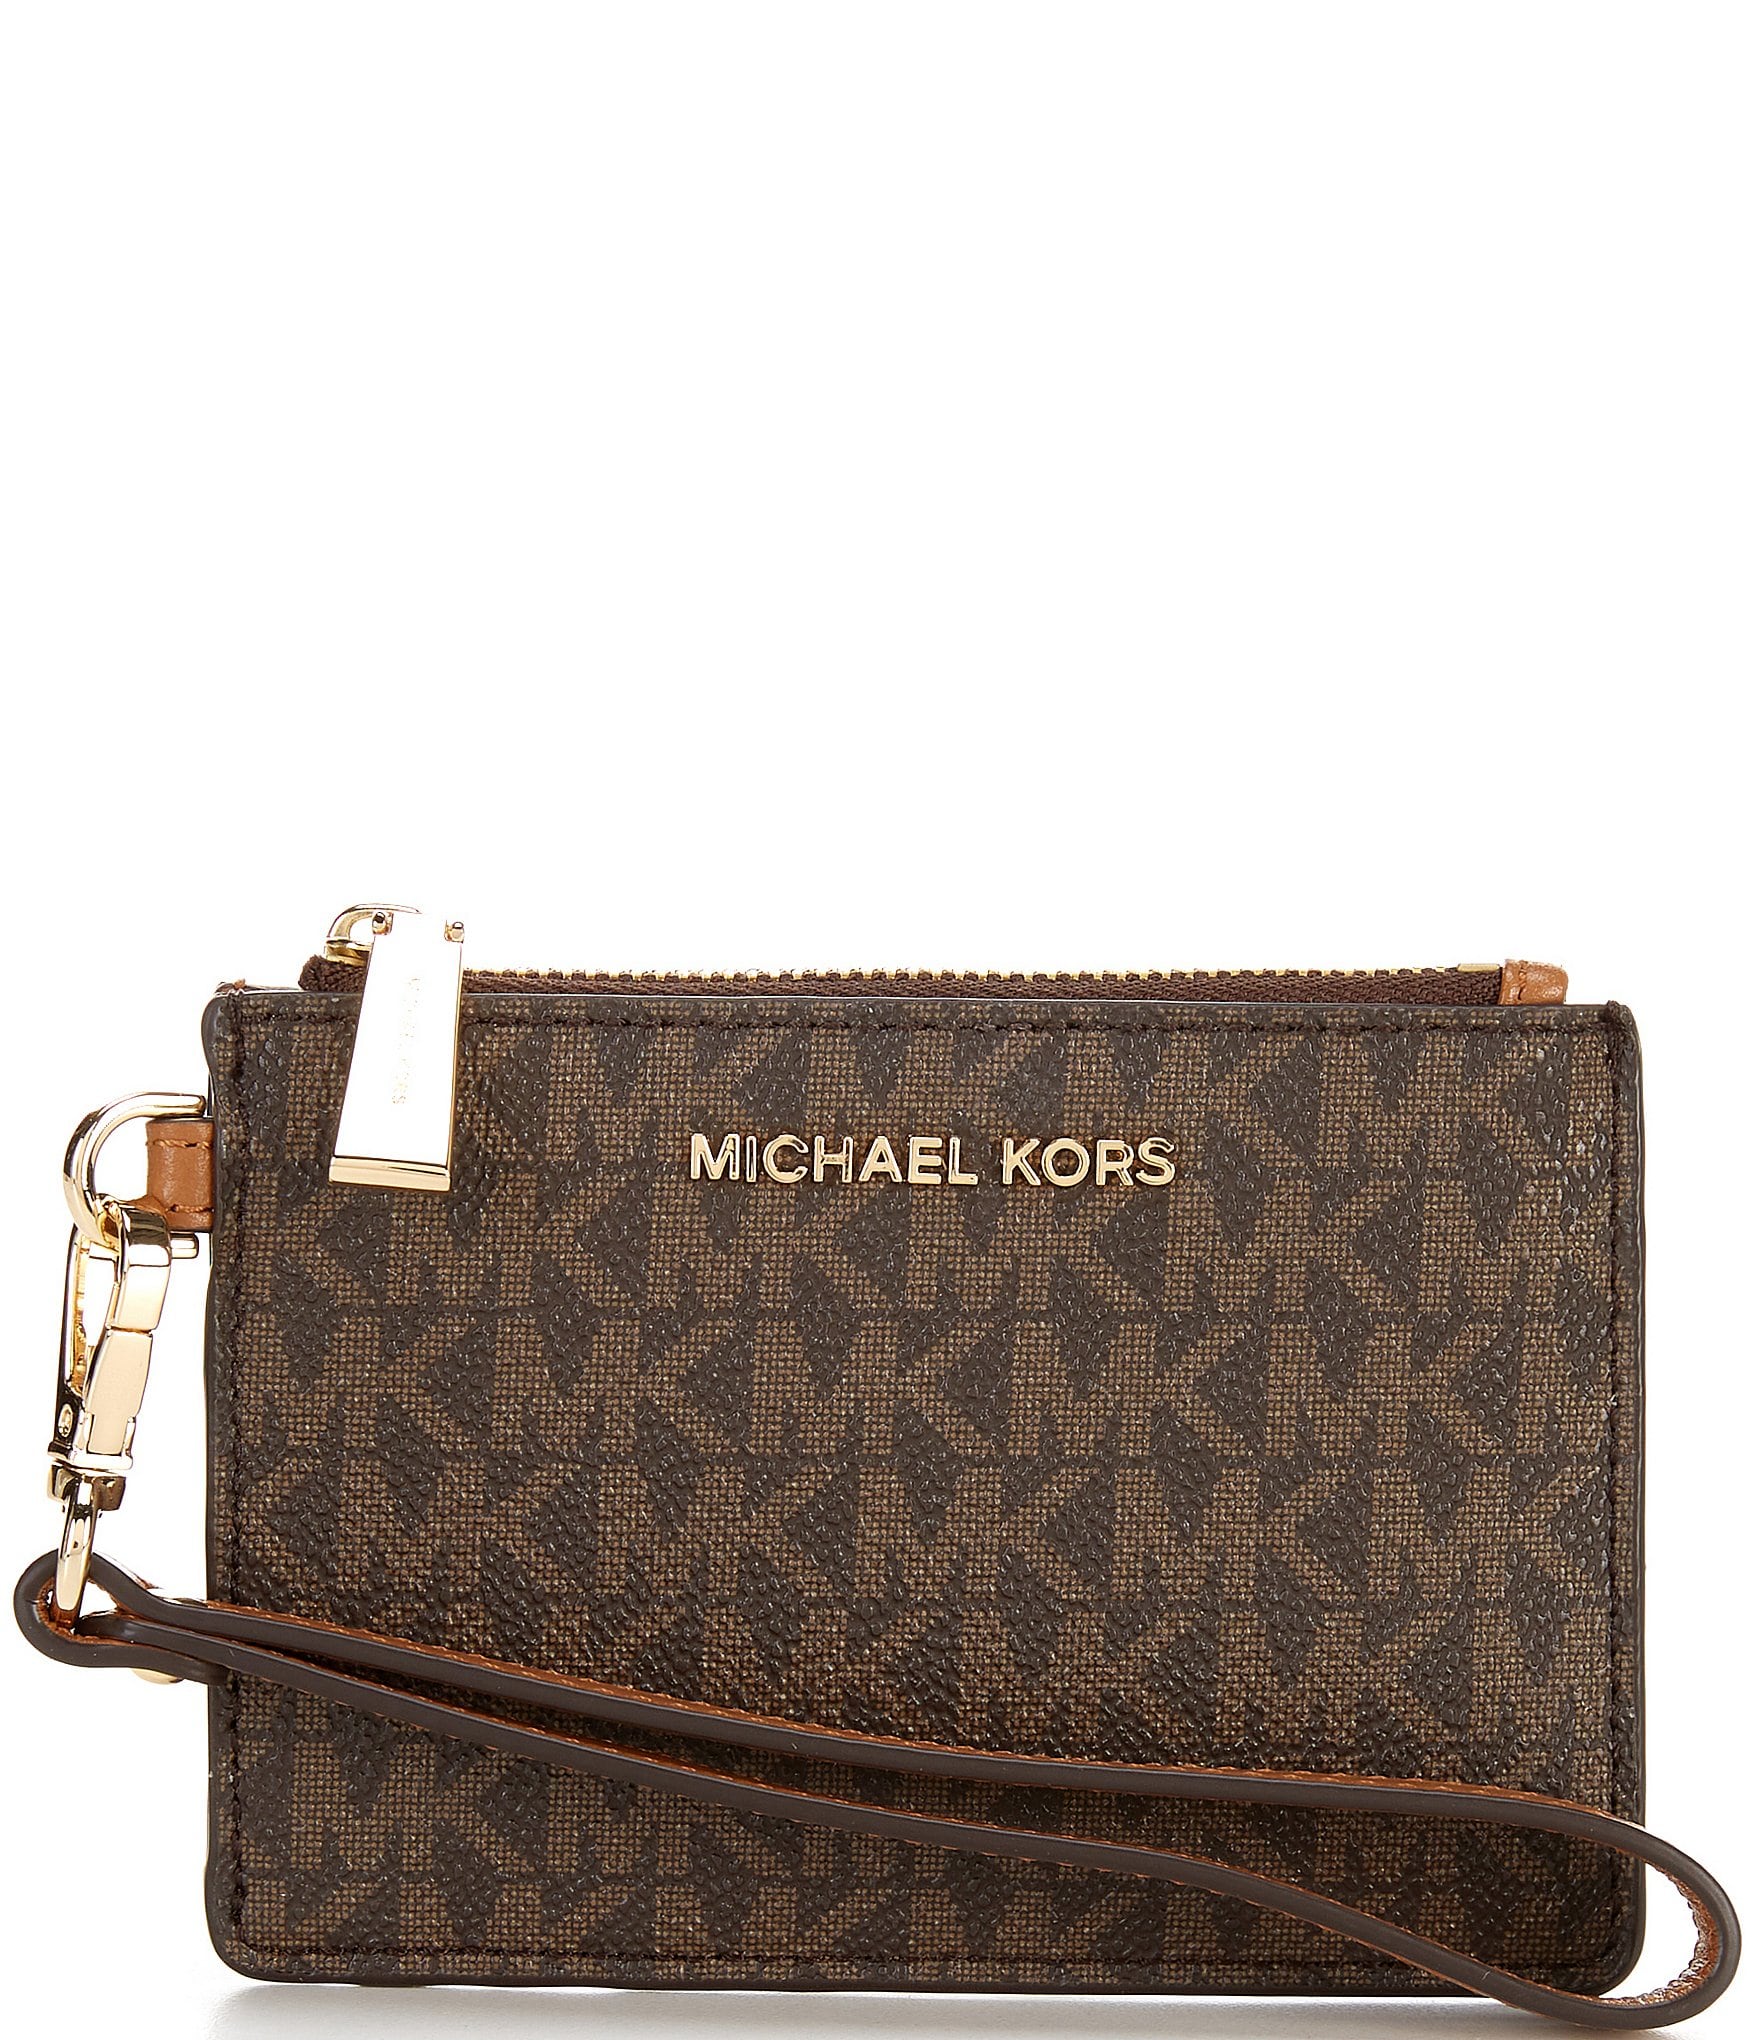 Michael Kors purse: Get up to 60% off the brand's bags and more-cheohanoi.vn